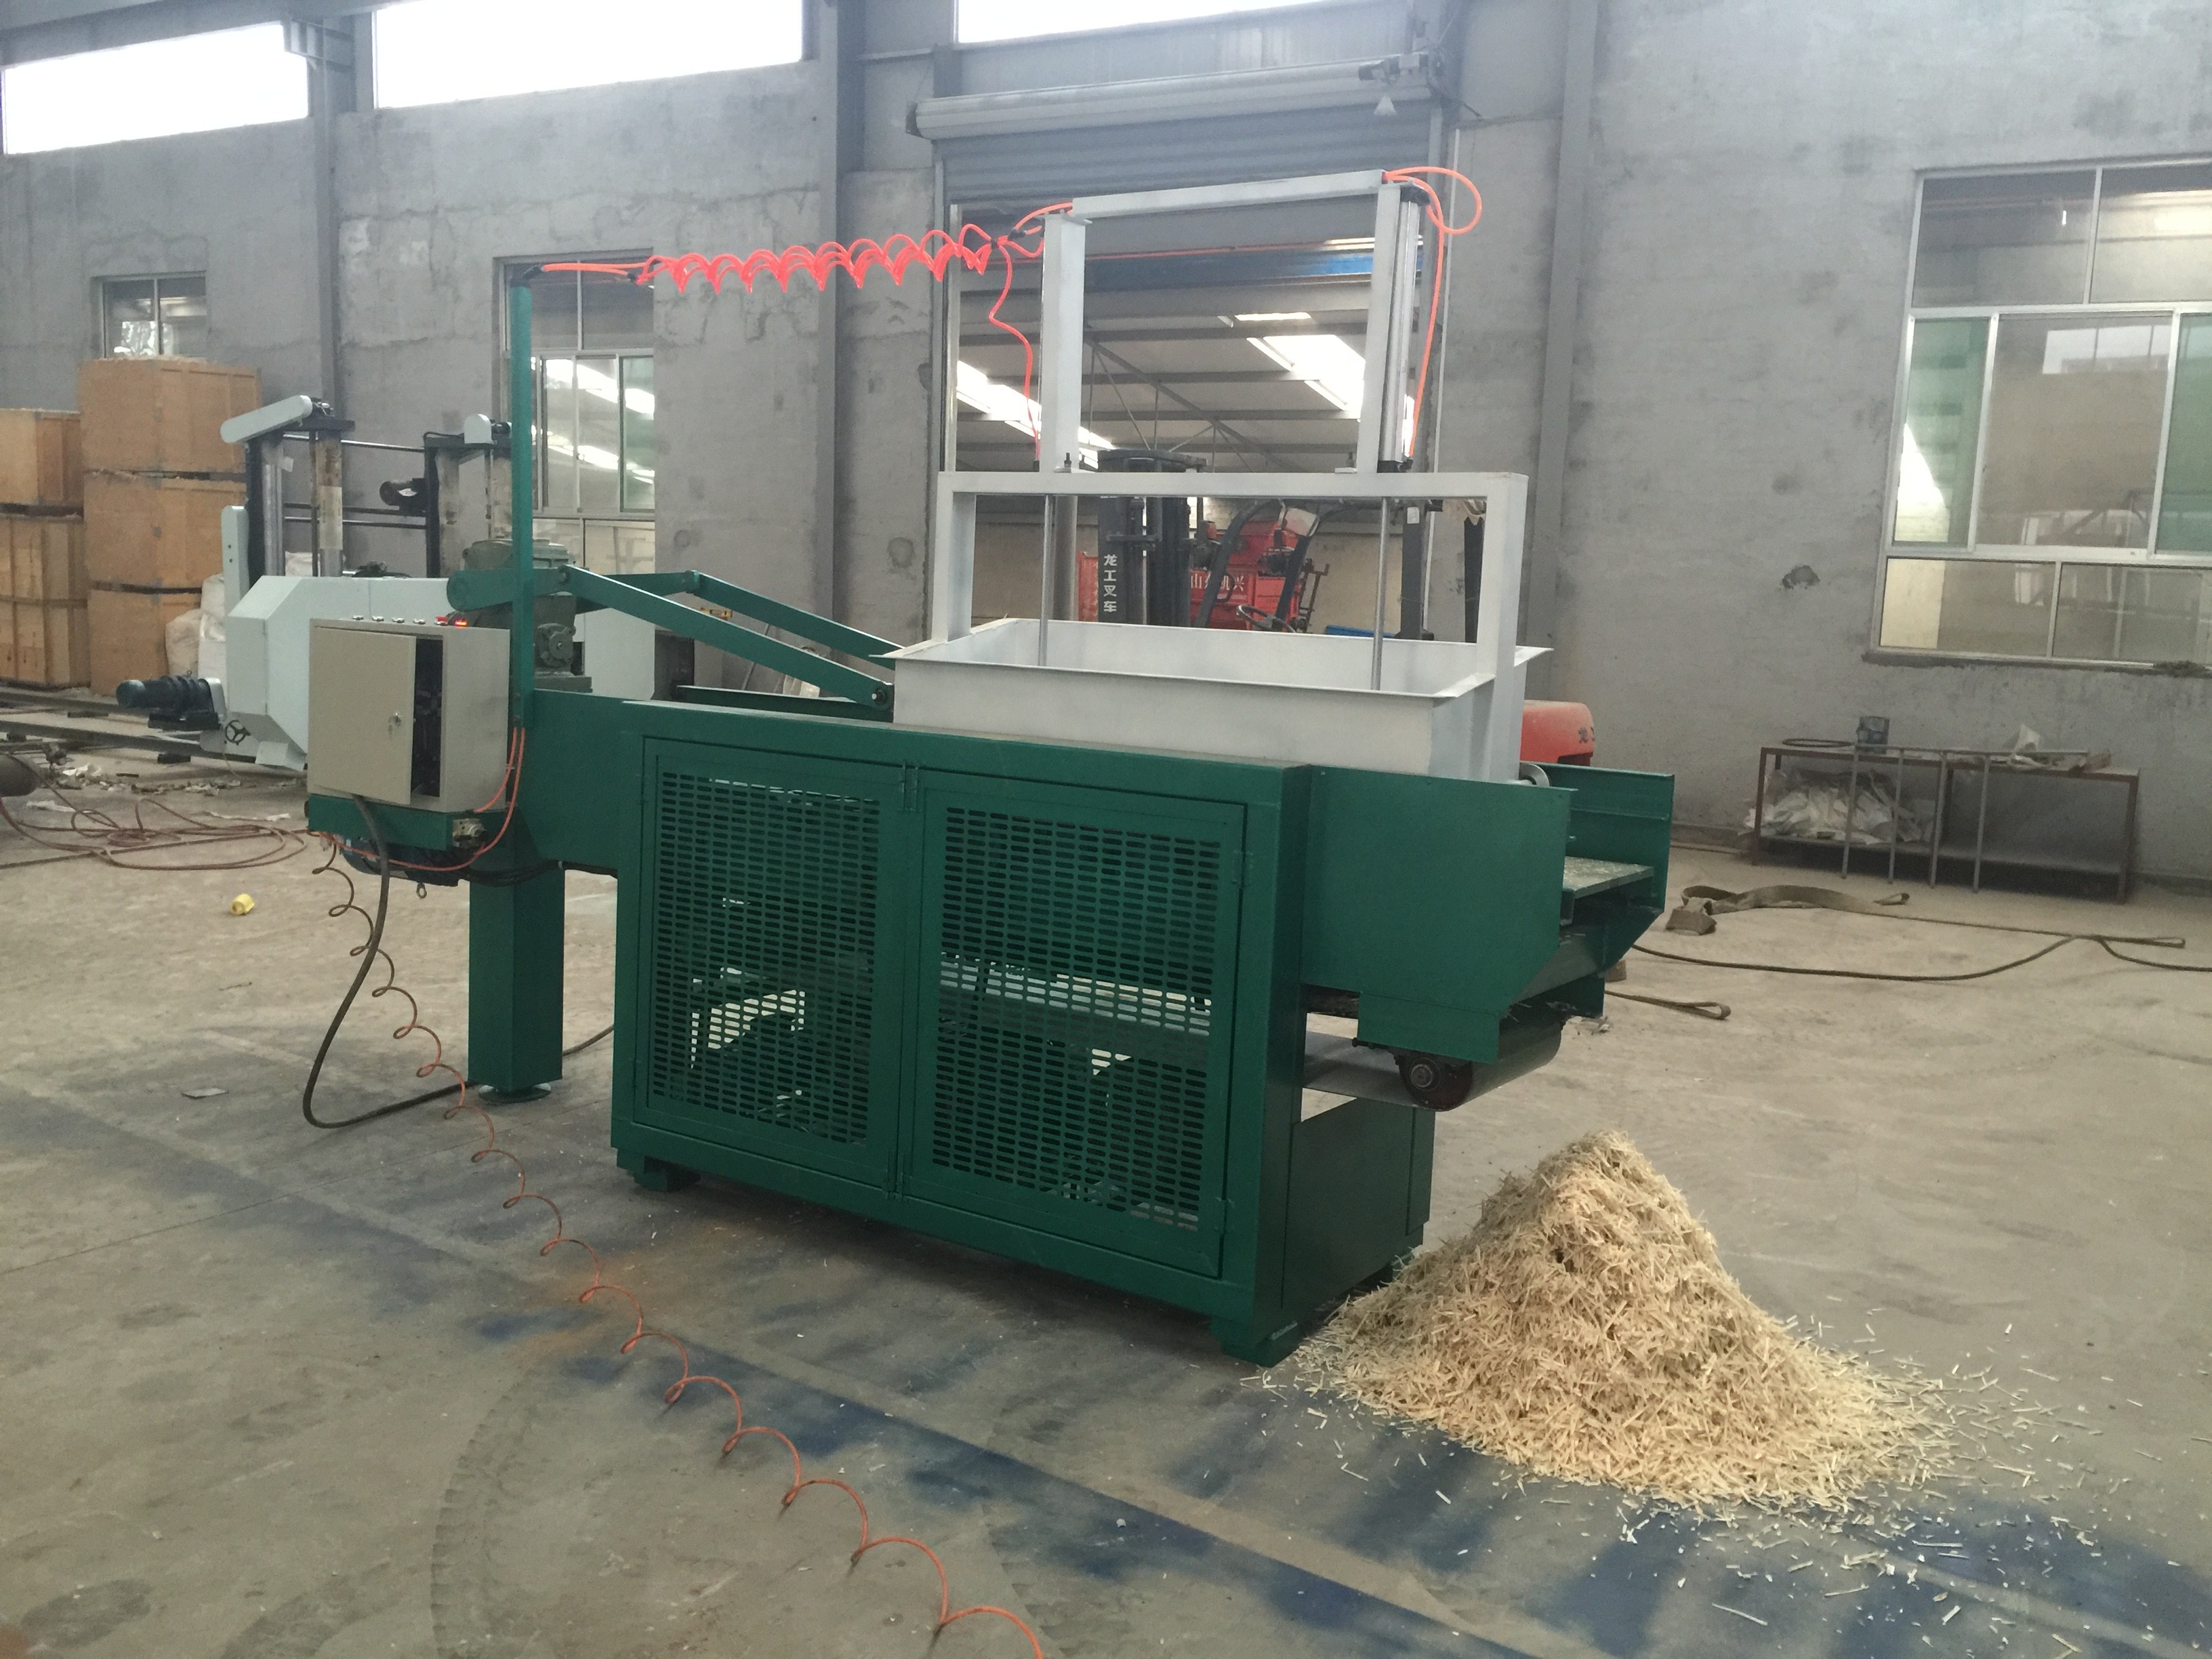 Wood Shavings Machine For Sale Dura Wood Shaving Machine Poultry Farm Used For Sale Wood Shavings Machine Manufacturer From China 105088885